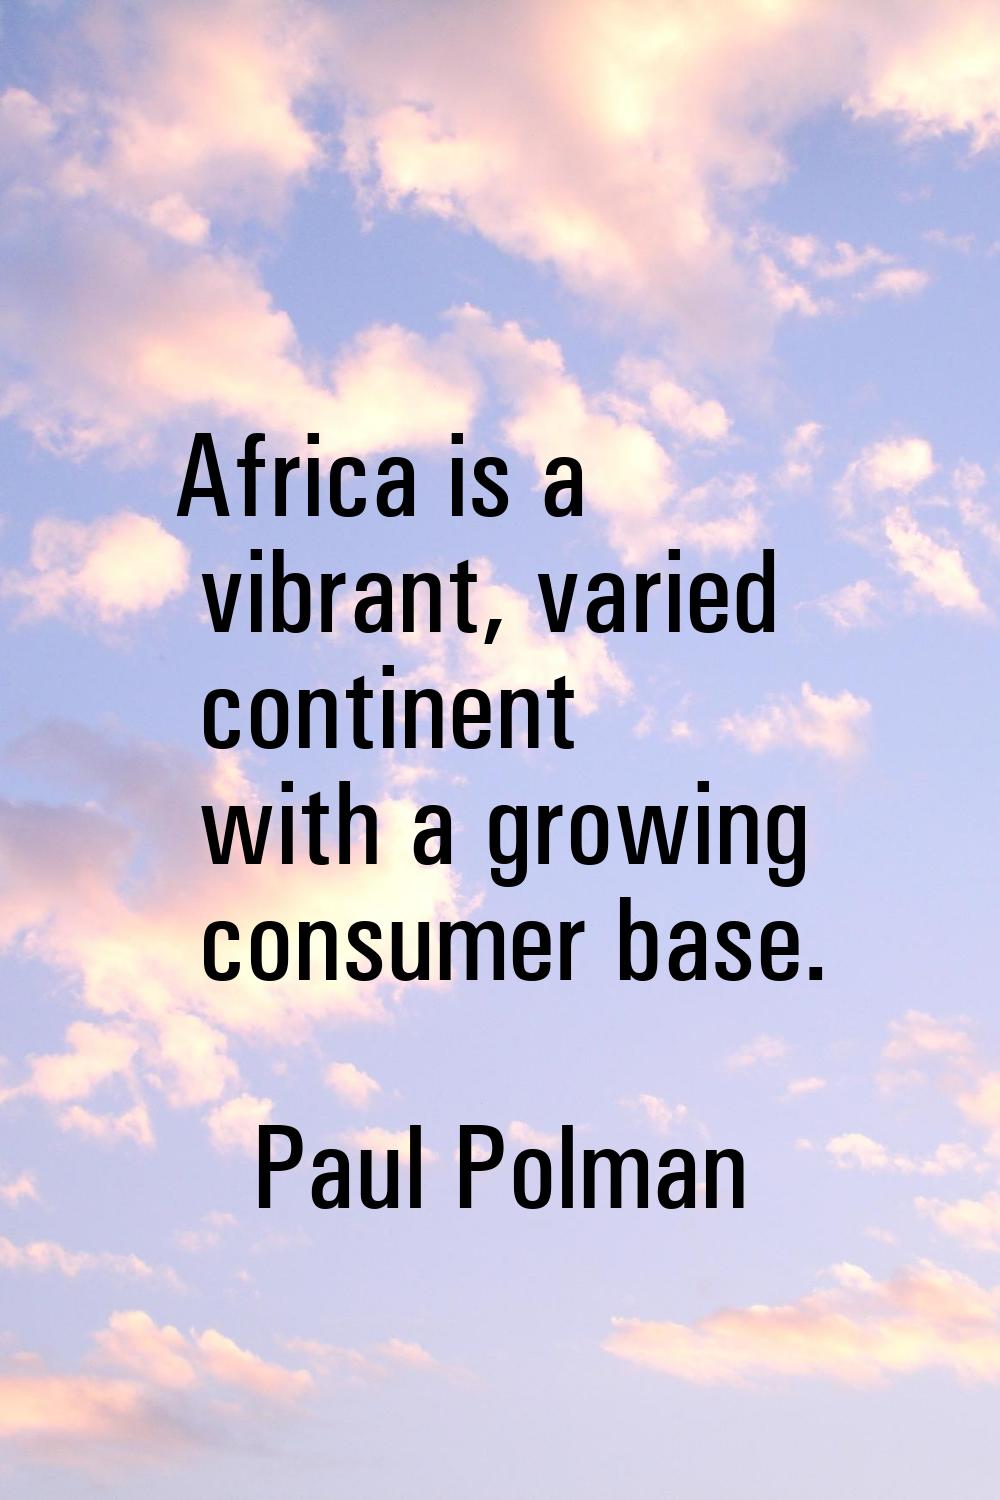 Africa is a vibrant, varied continent with a growing consumer base.